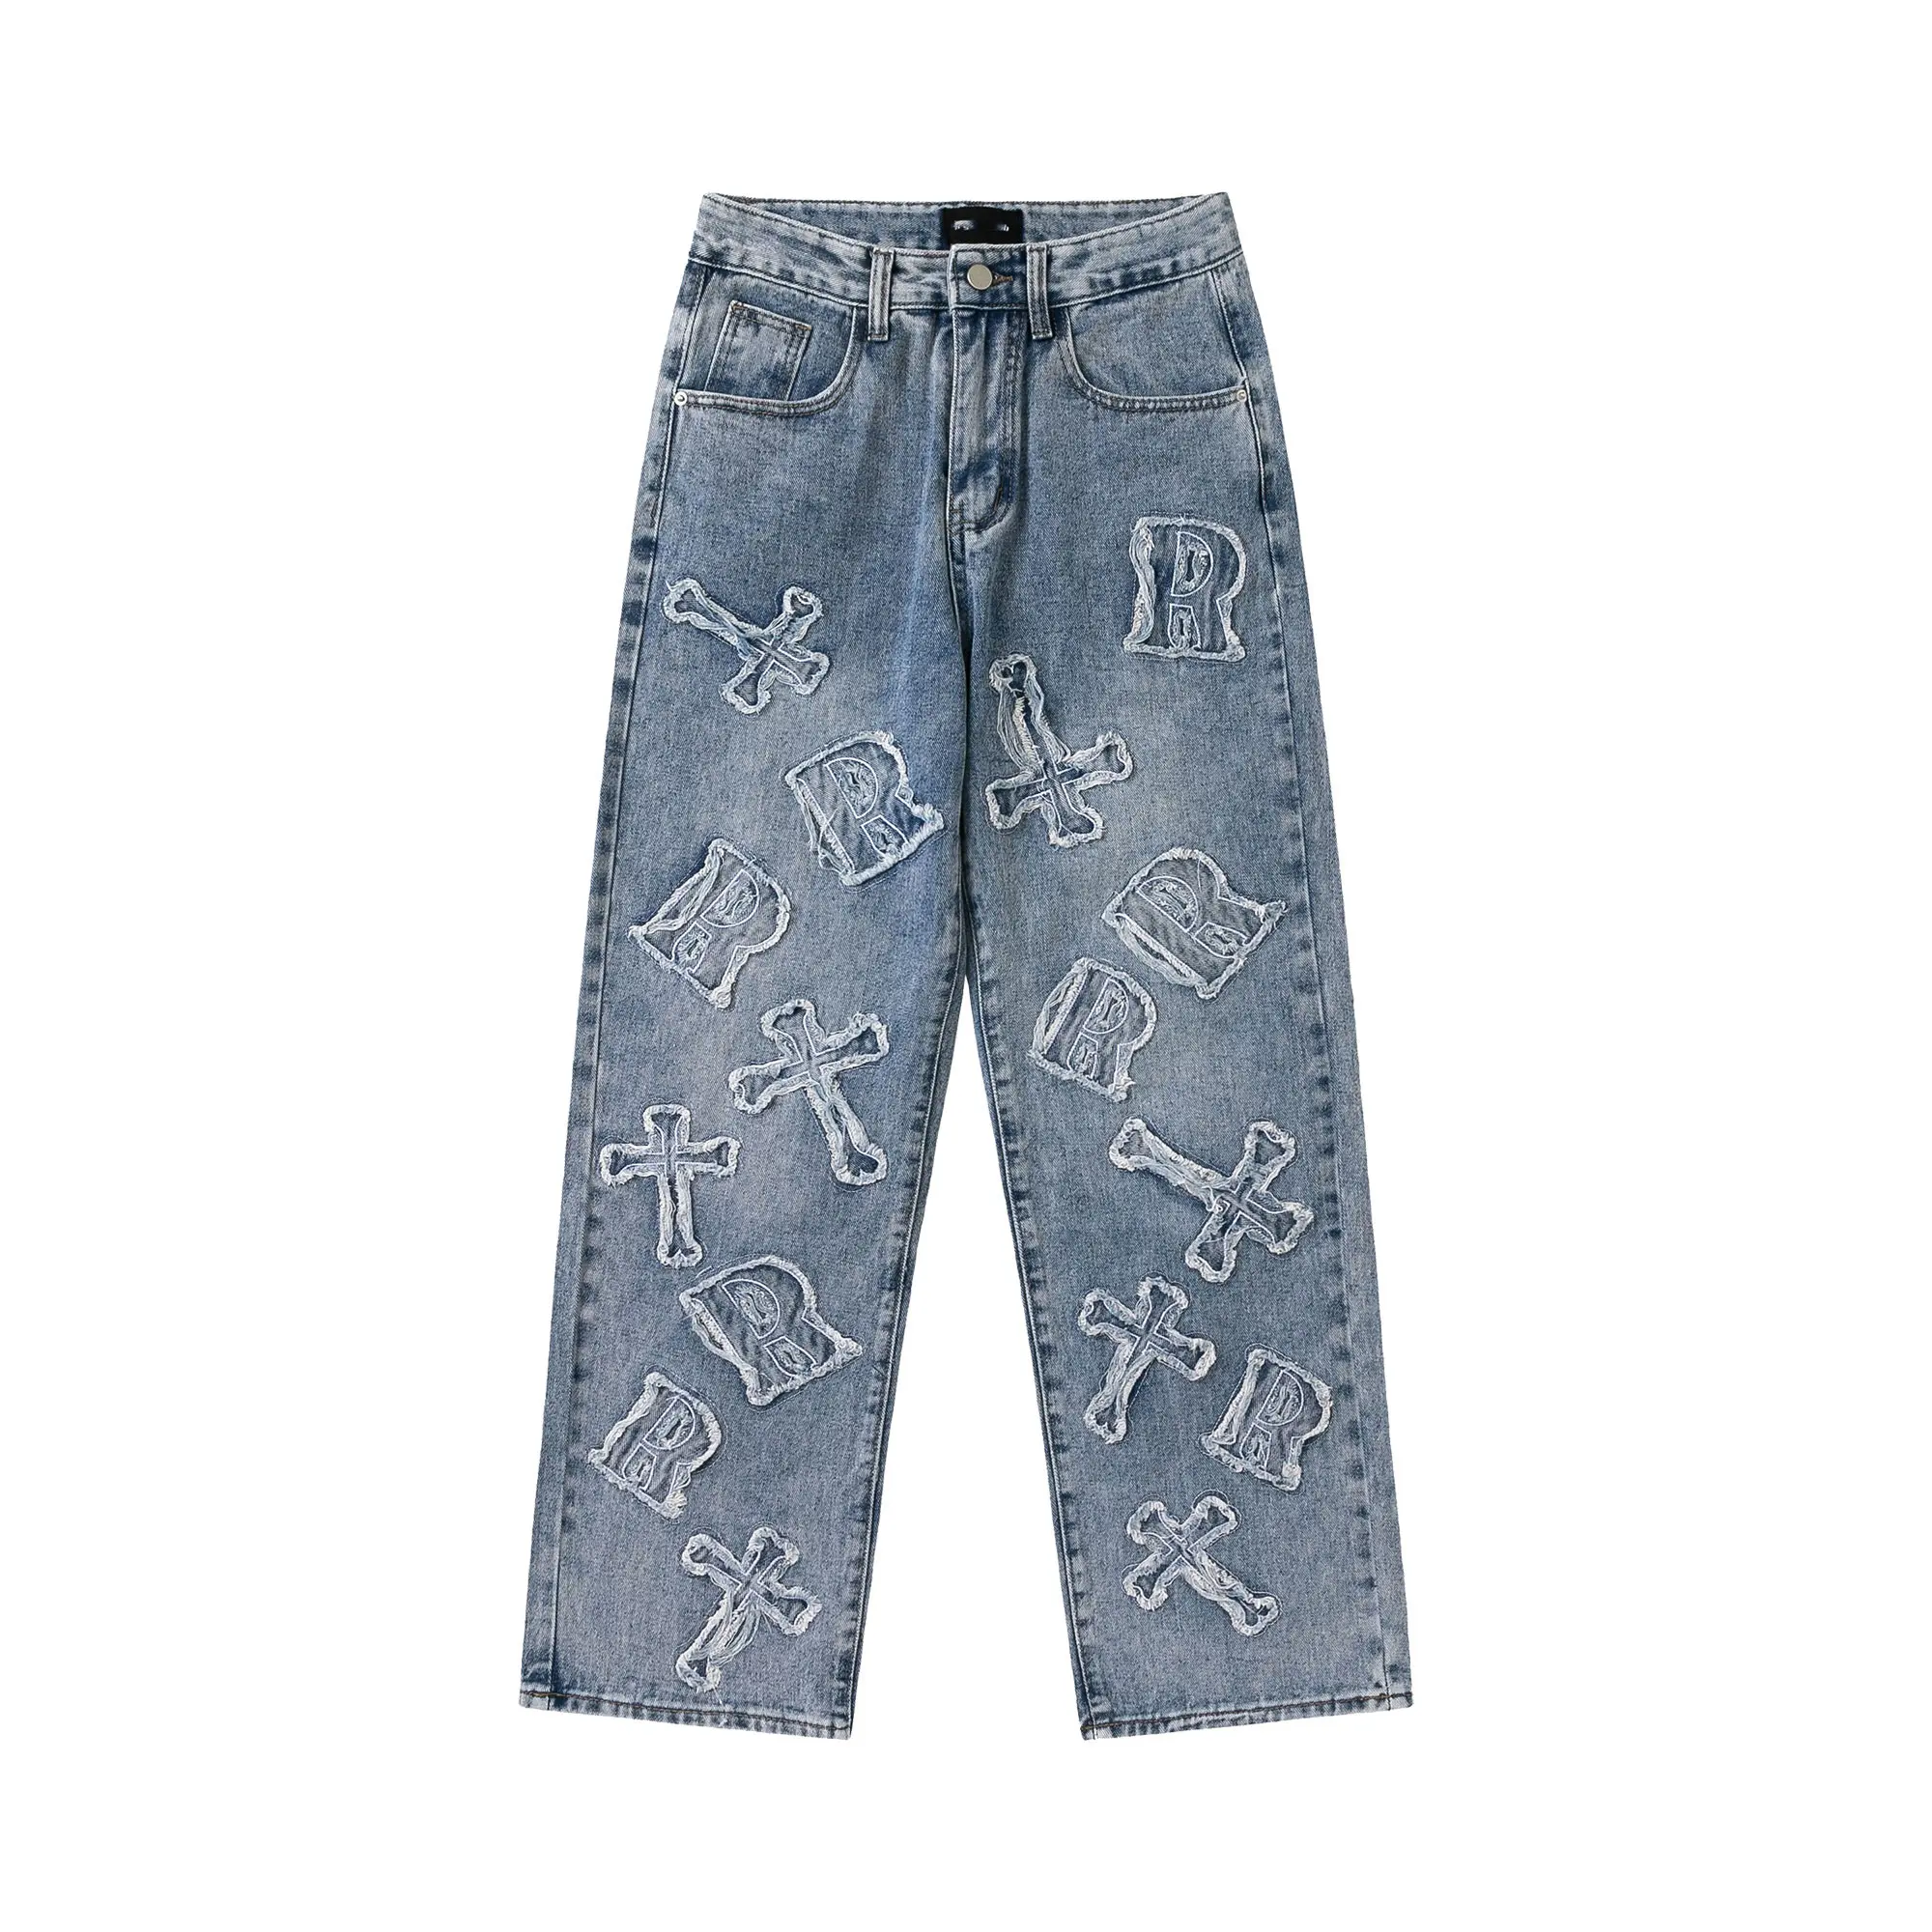 High Street Letter Embroidery Distressed Tassel Jeans Men Ins Hip Hop Loose Straight Long Pants Enzyme Wash Jeans High Quality